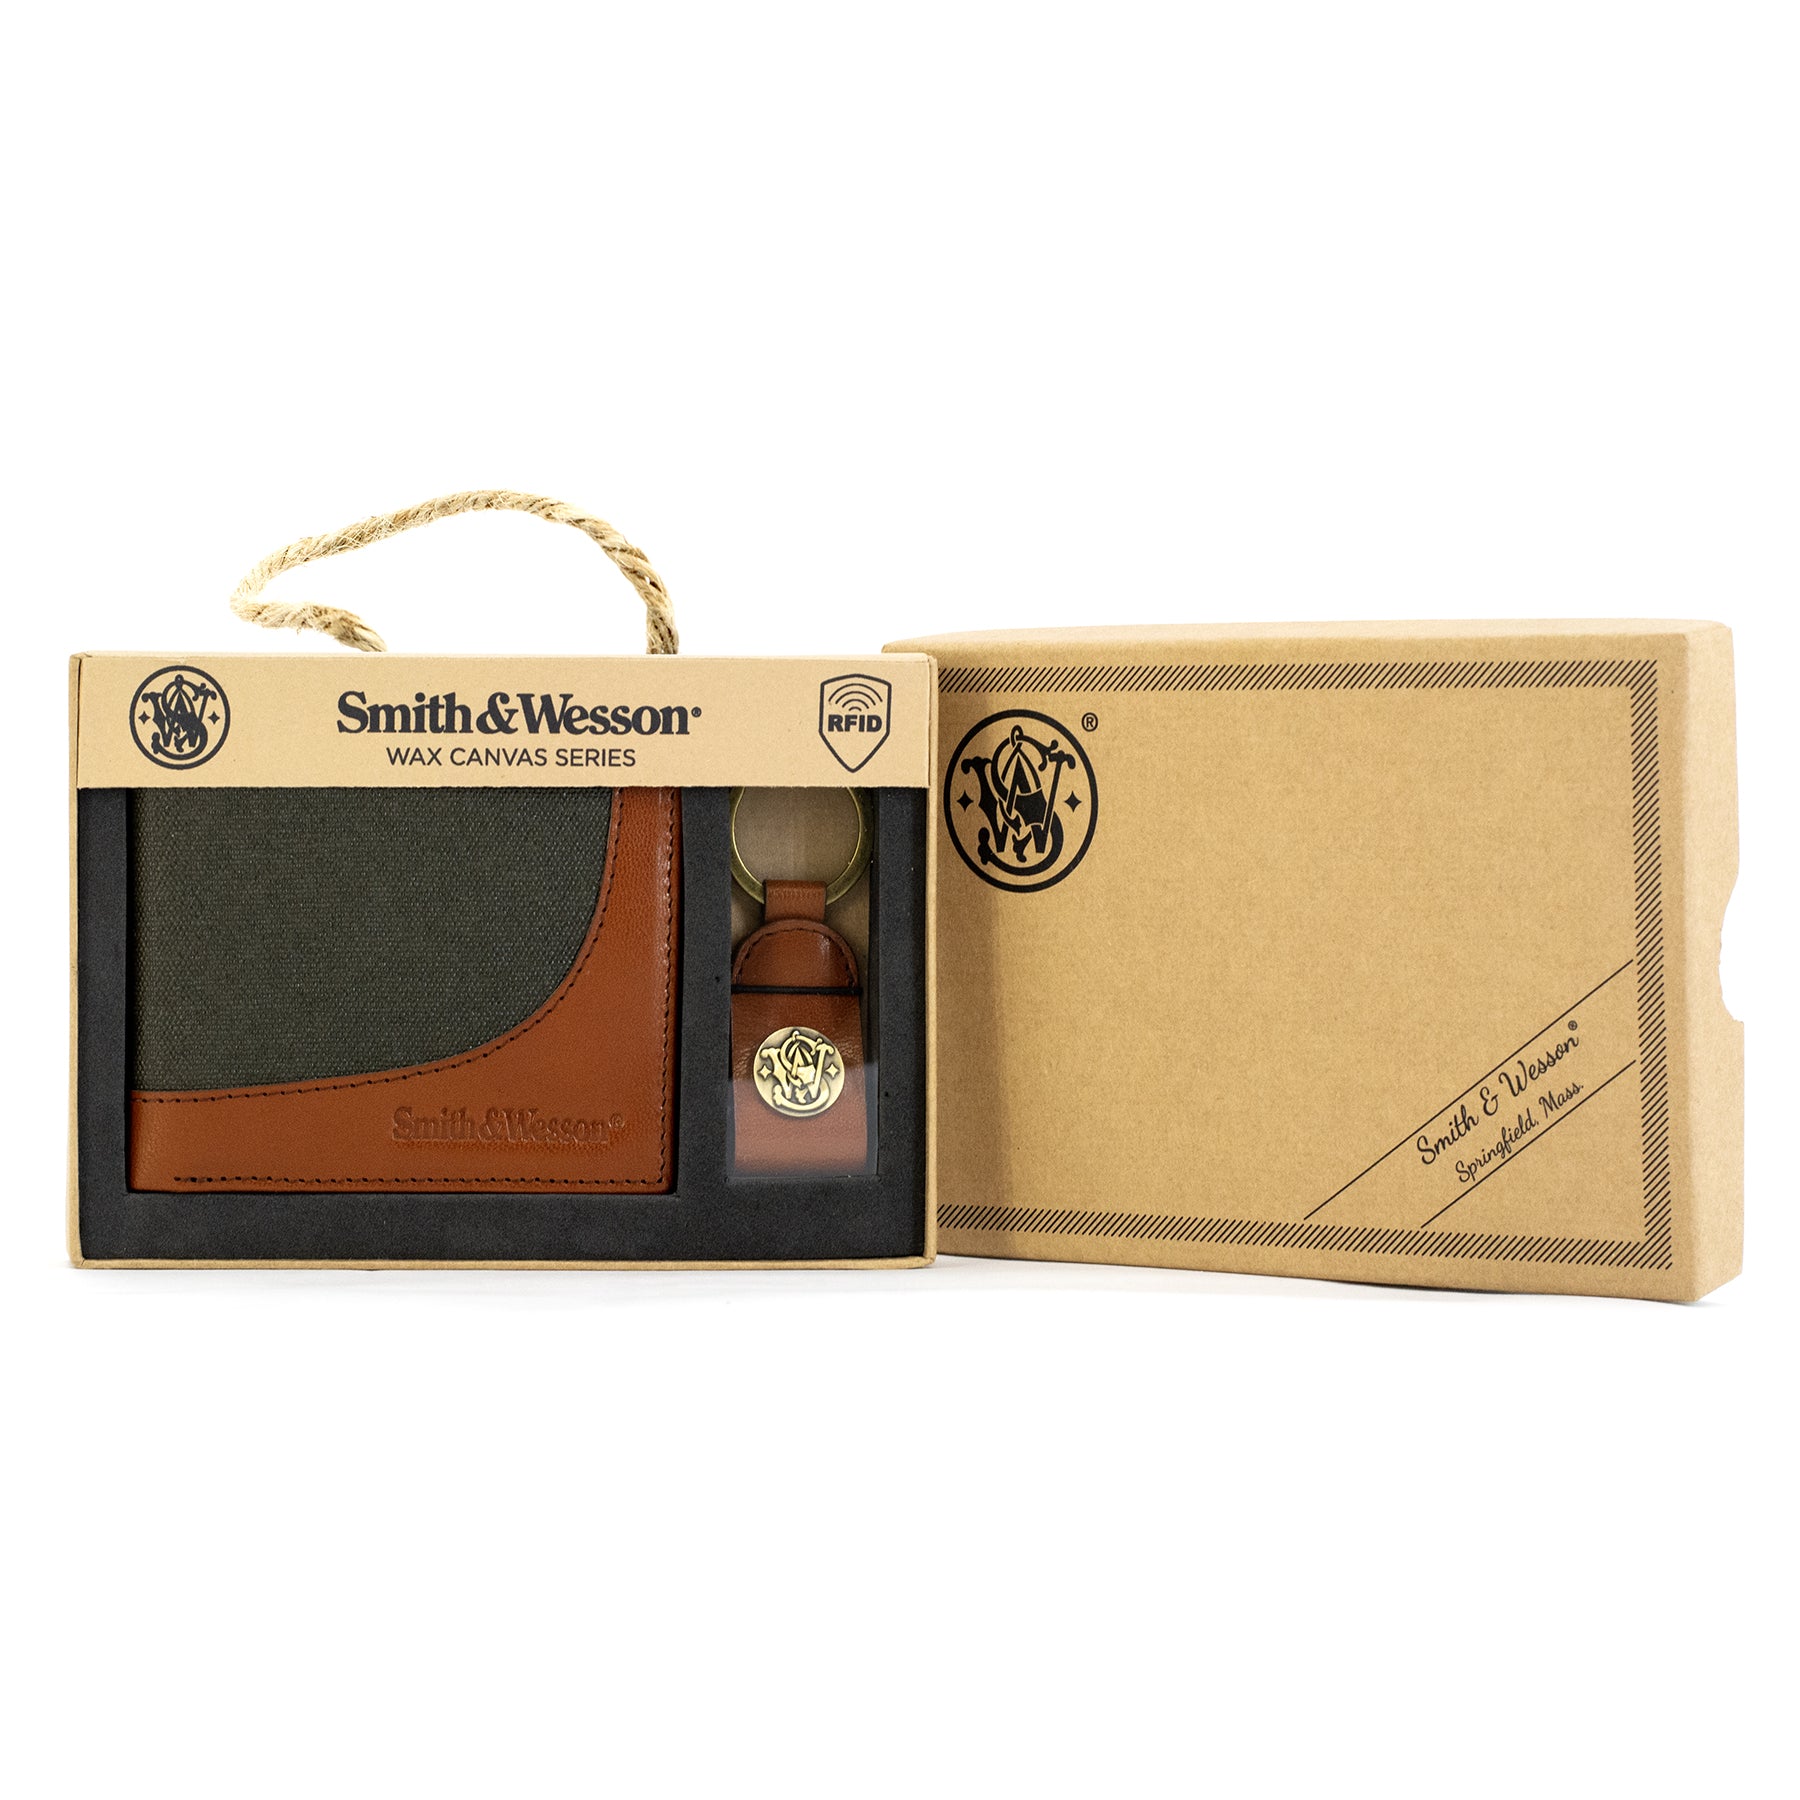 Smith & Wesson Waxed Canvas Gift Set POP